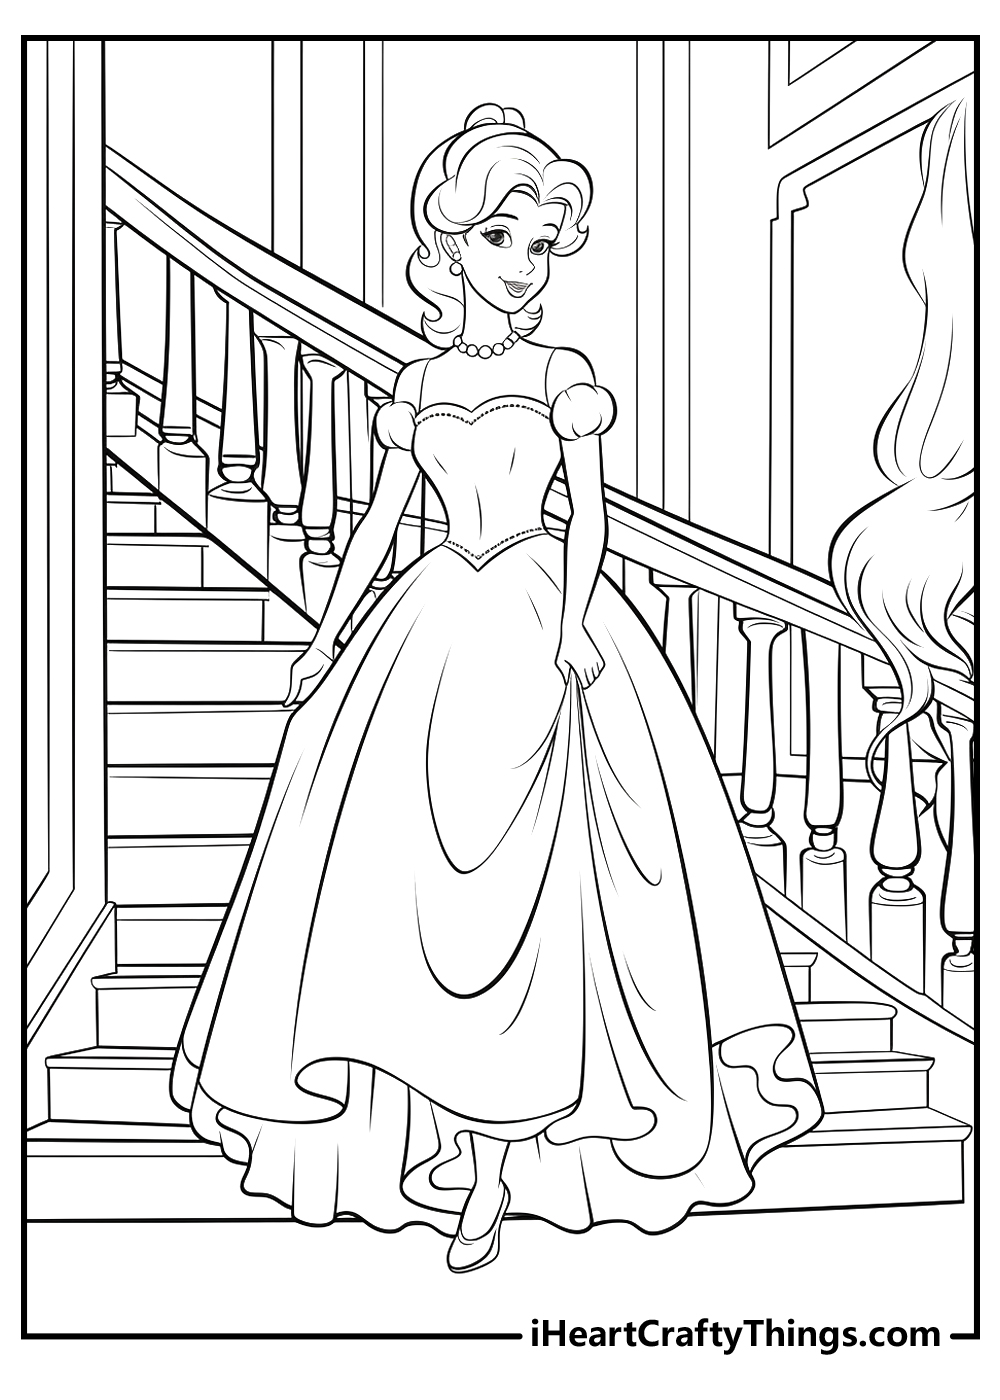 Cinderella coloring printable for adults